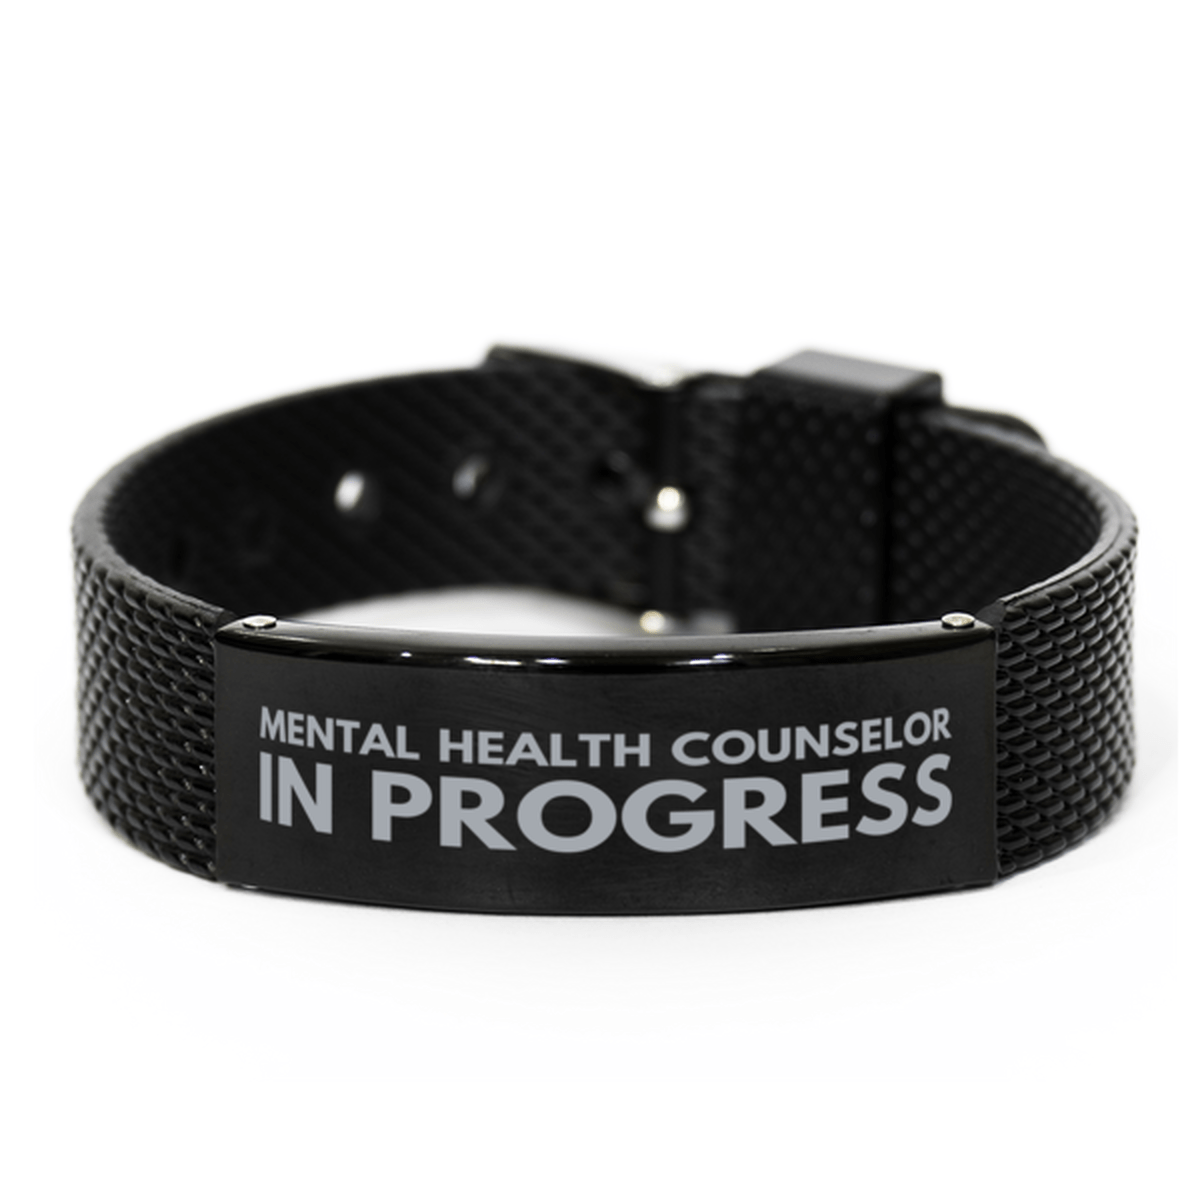 Inspirational Mental Health Counselor Black Shark Mesh Bracelet, Mental Health Counselor In Progress, Best Graduation Gifts for Students